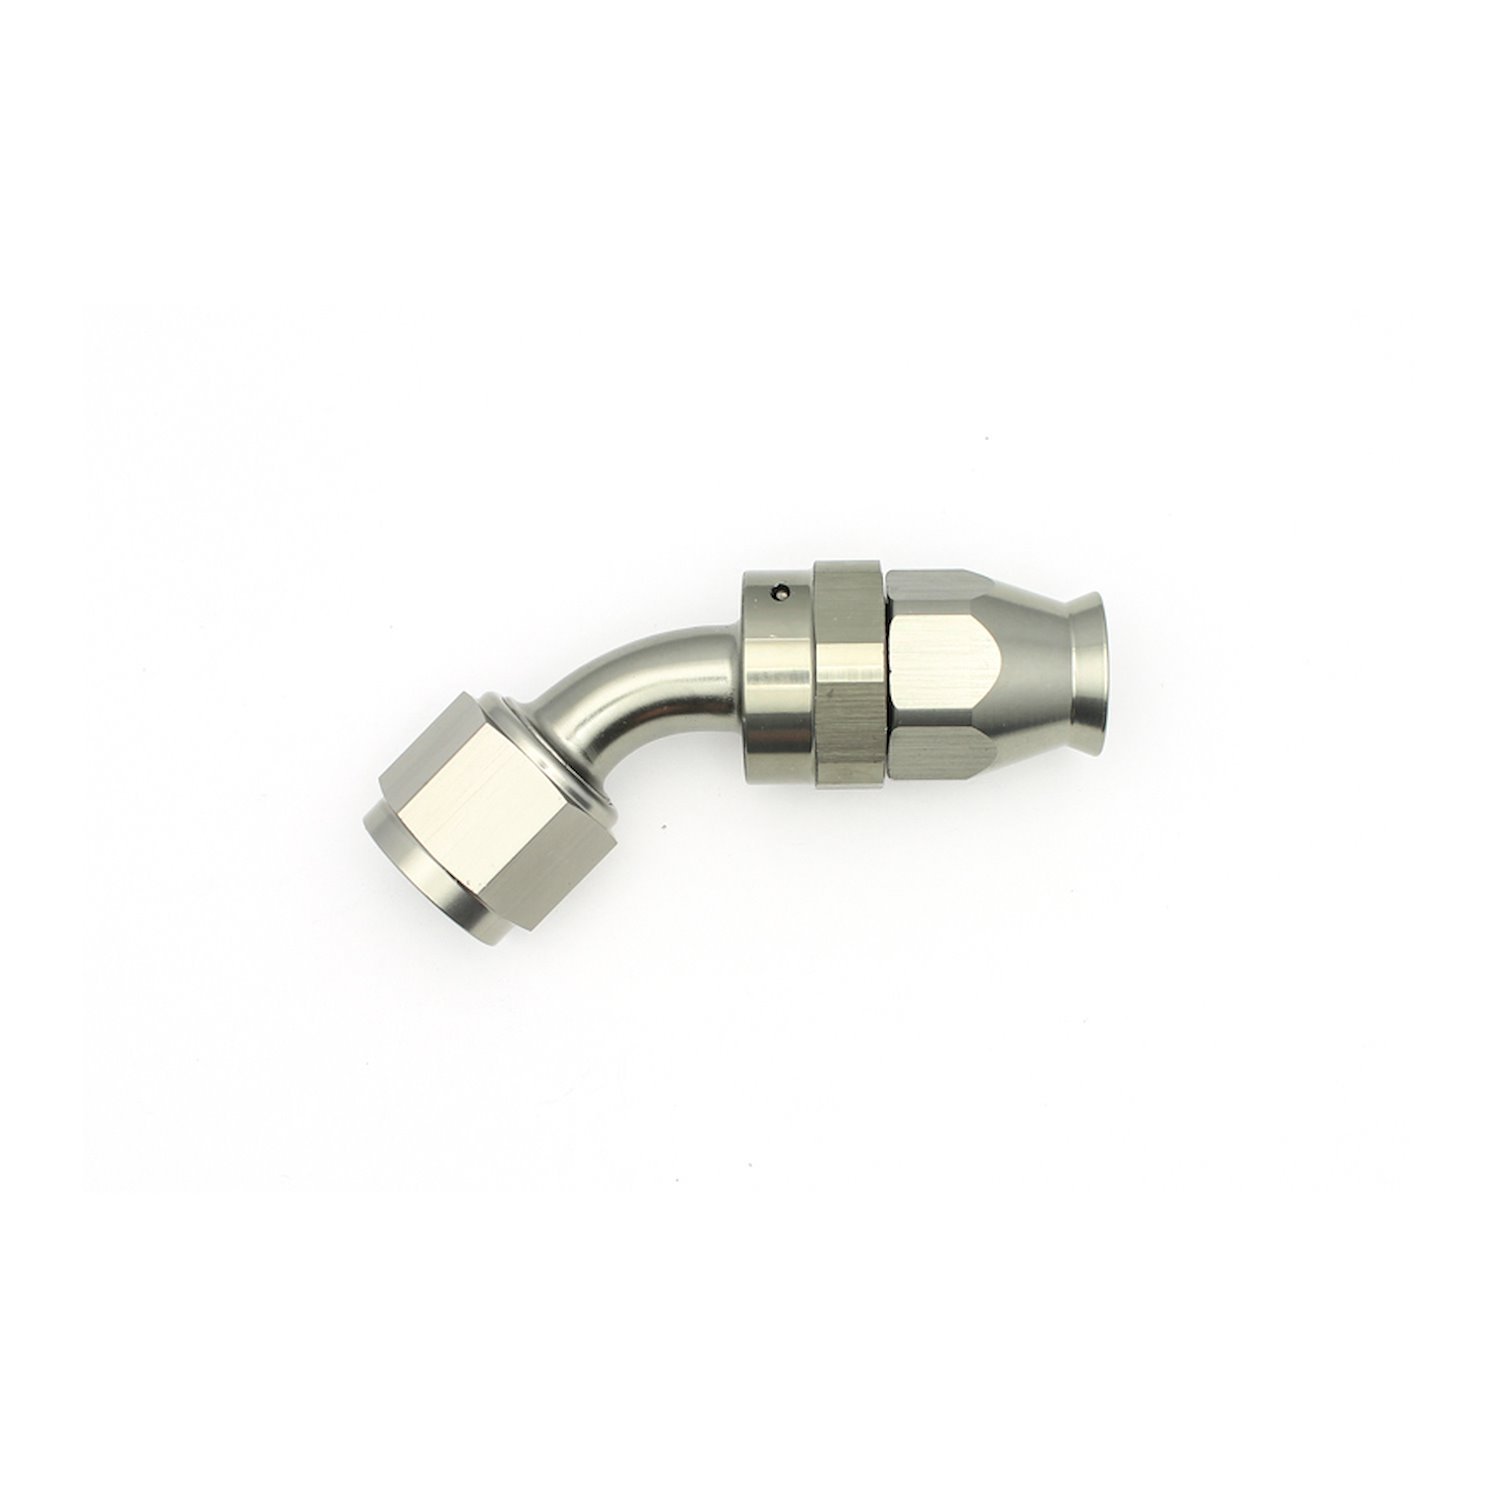 6020855 8AN Female Swivel 45-Degree Hose End PTFE (Incl 1 Olive Insert) Anodized DW Titanium